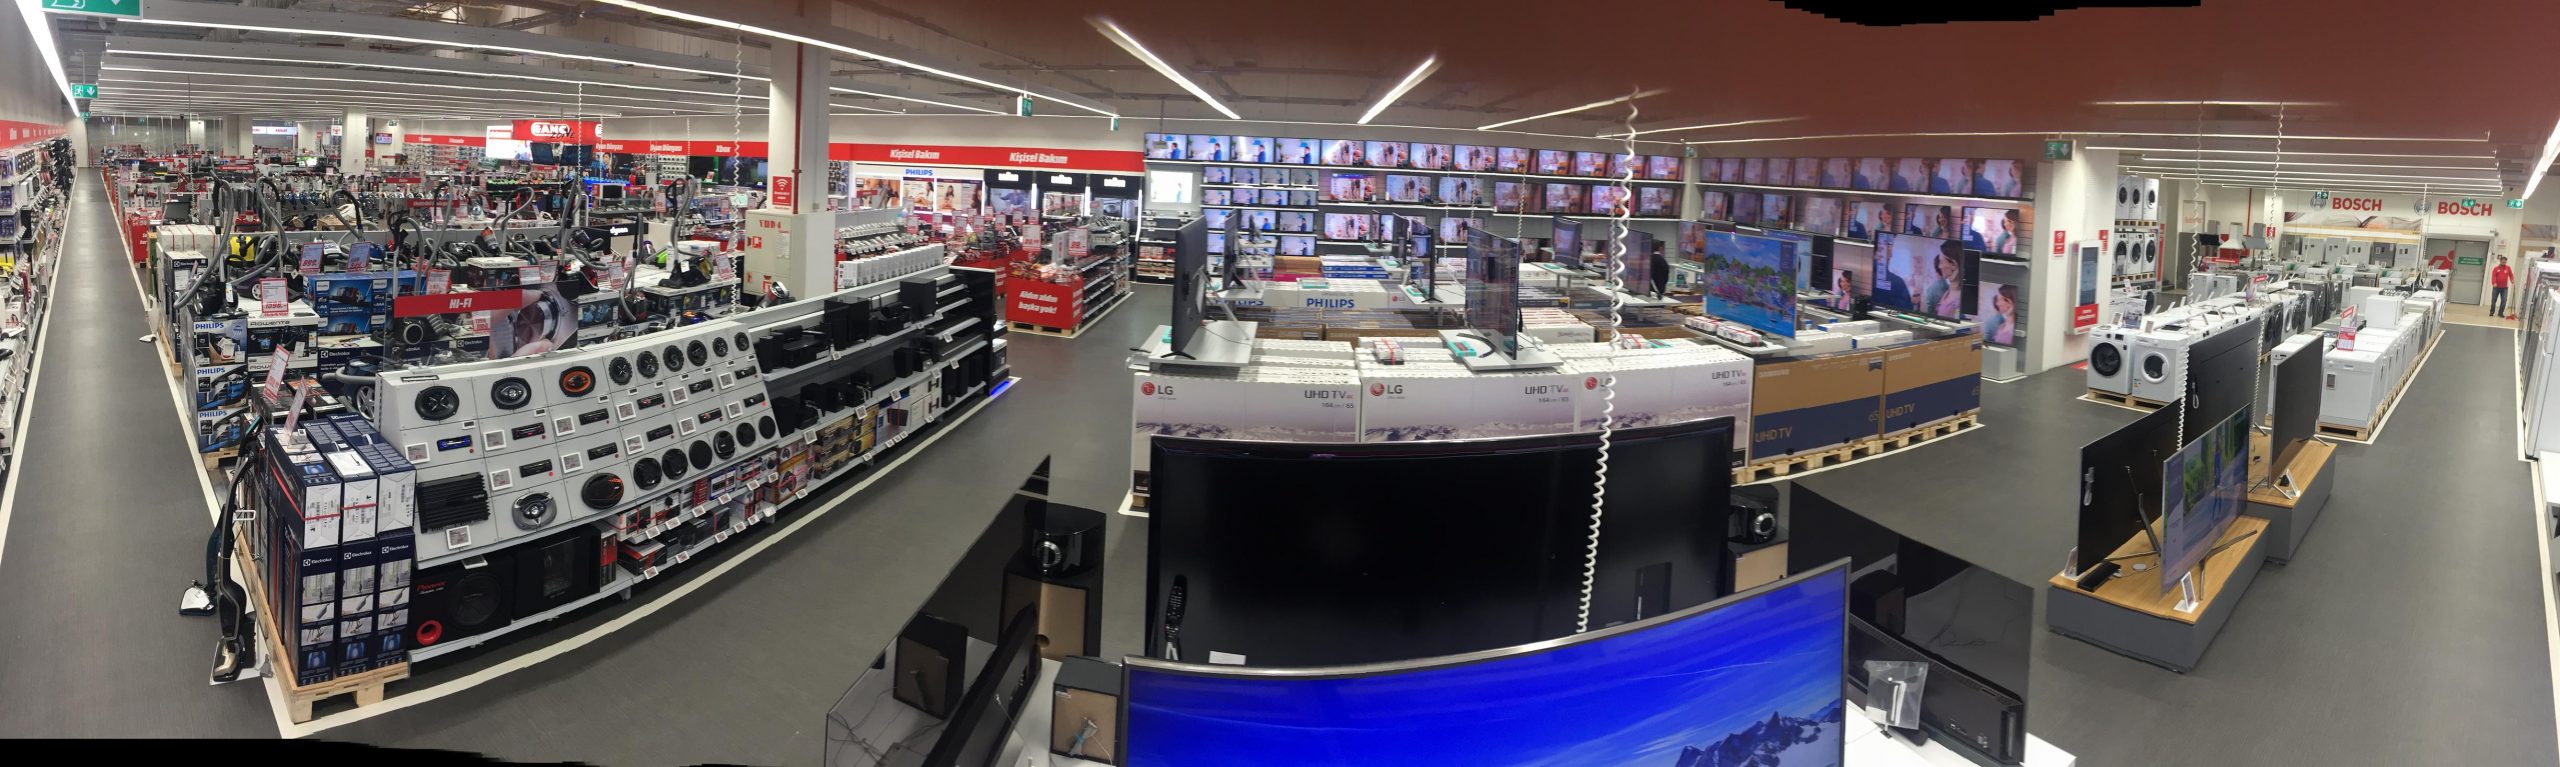 Üçge – Wholesale Store equipment and Shelf Systems